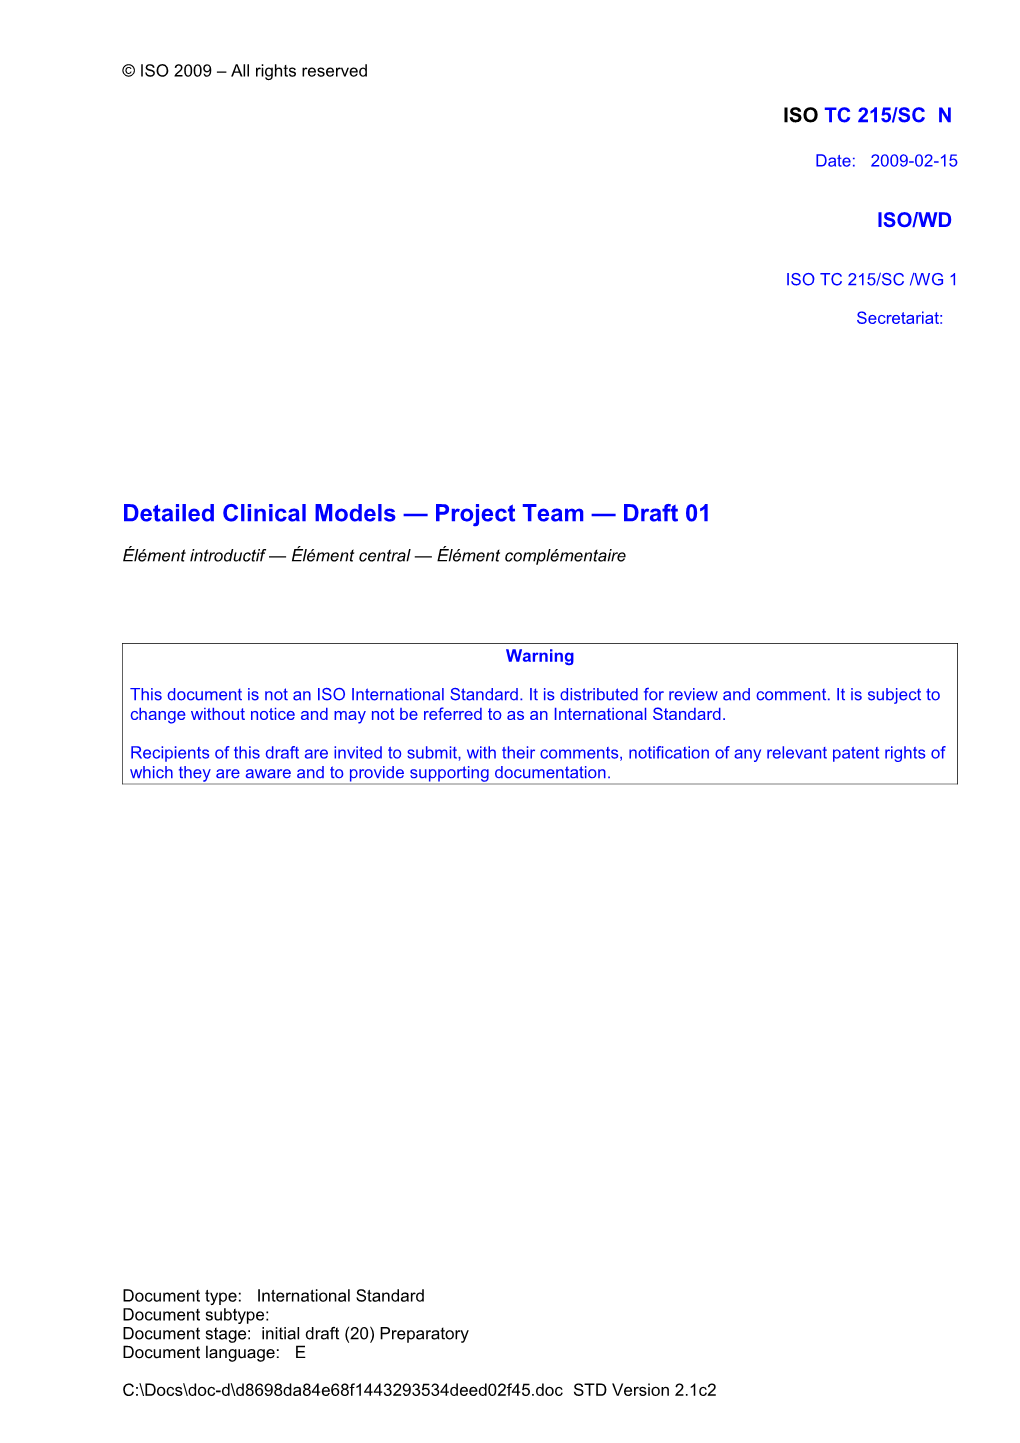 Detailed Clinical Models Draft 075